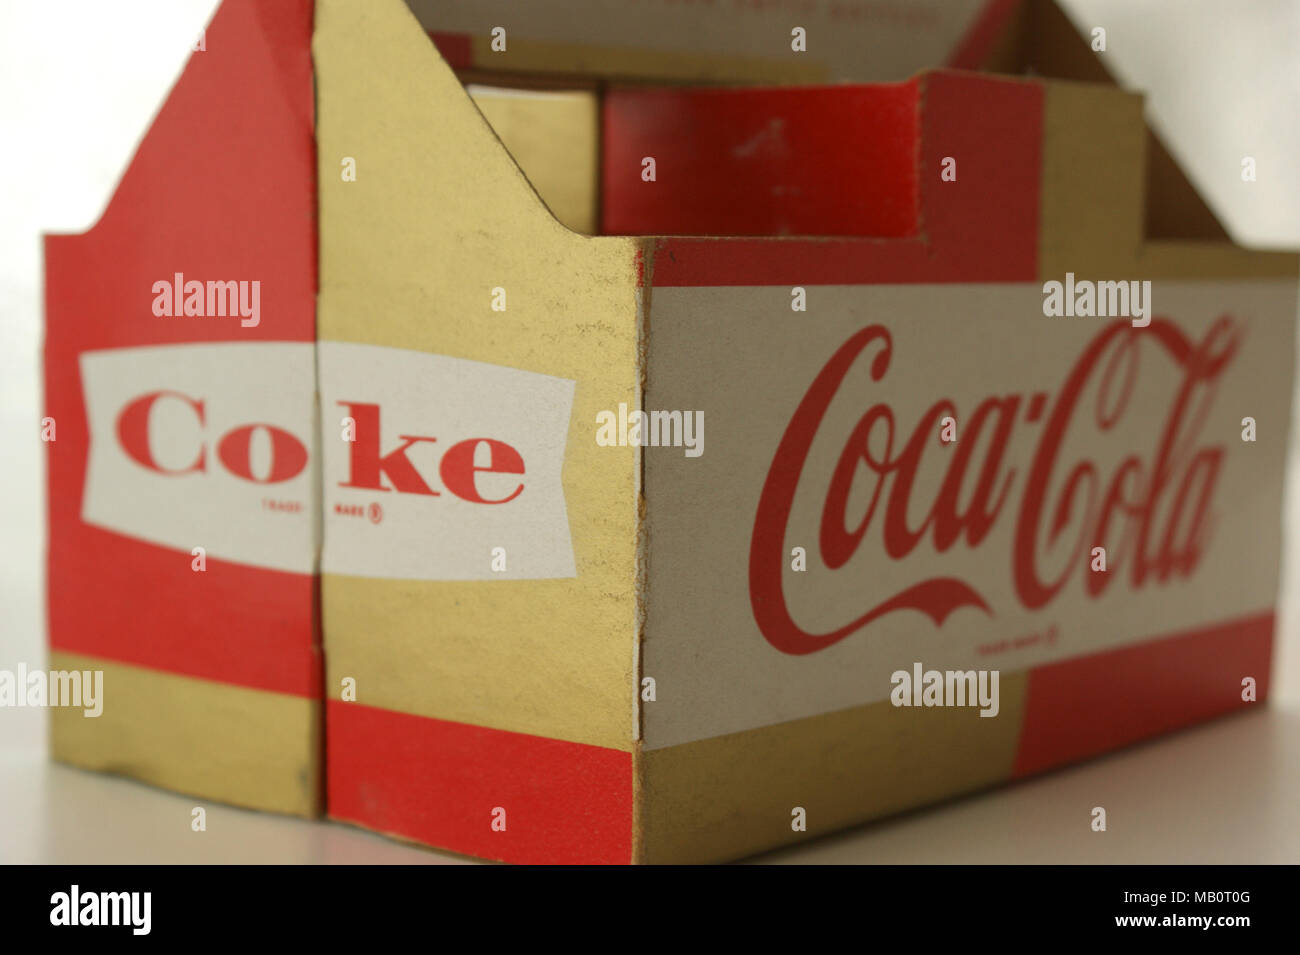 Coca Cola cardboard carrying holder from 1960s, designed to hold six small bottles. These were used to recycle glass bottles, which had a deposit value payable on them from the retailer. Stock Photo